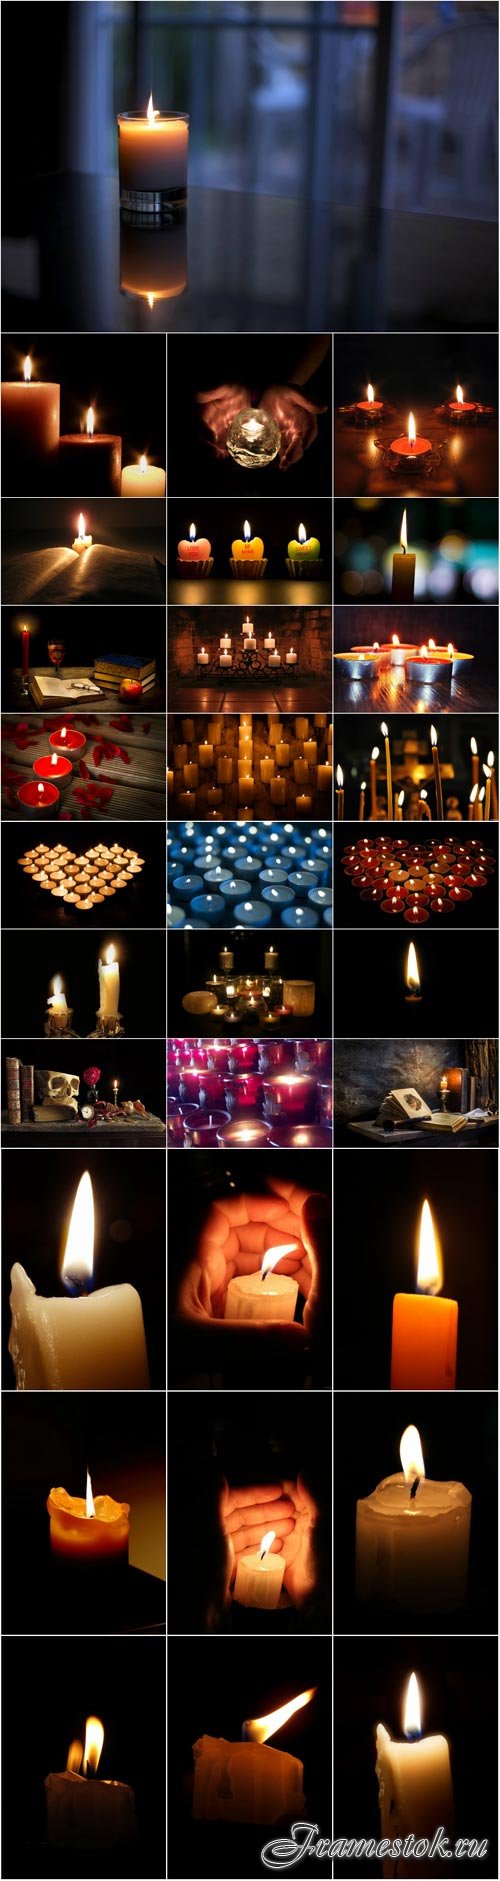 Romance of candles raster graphics